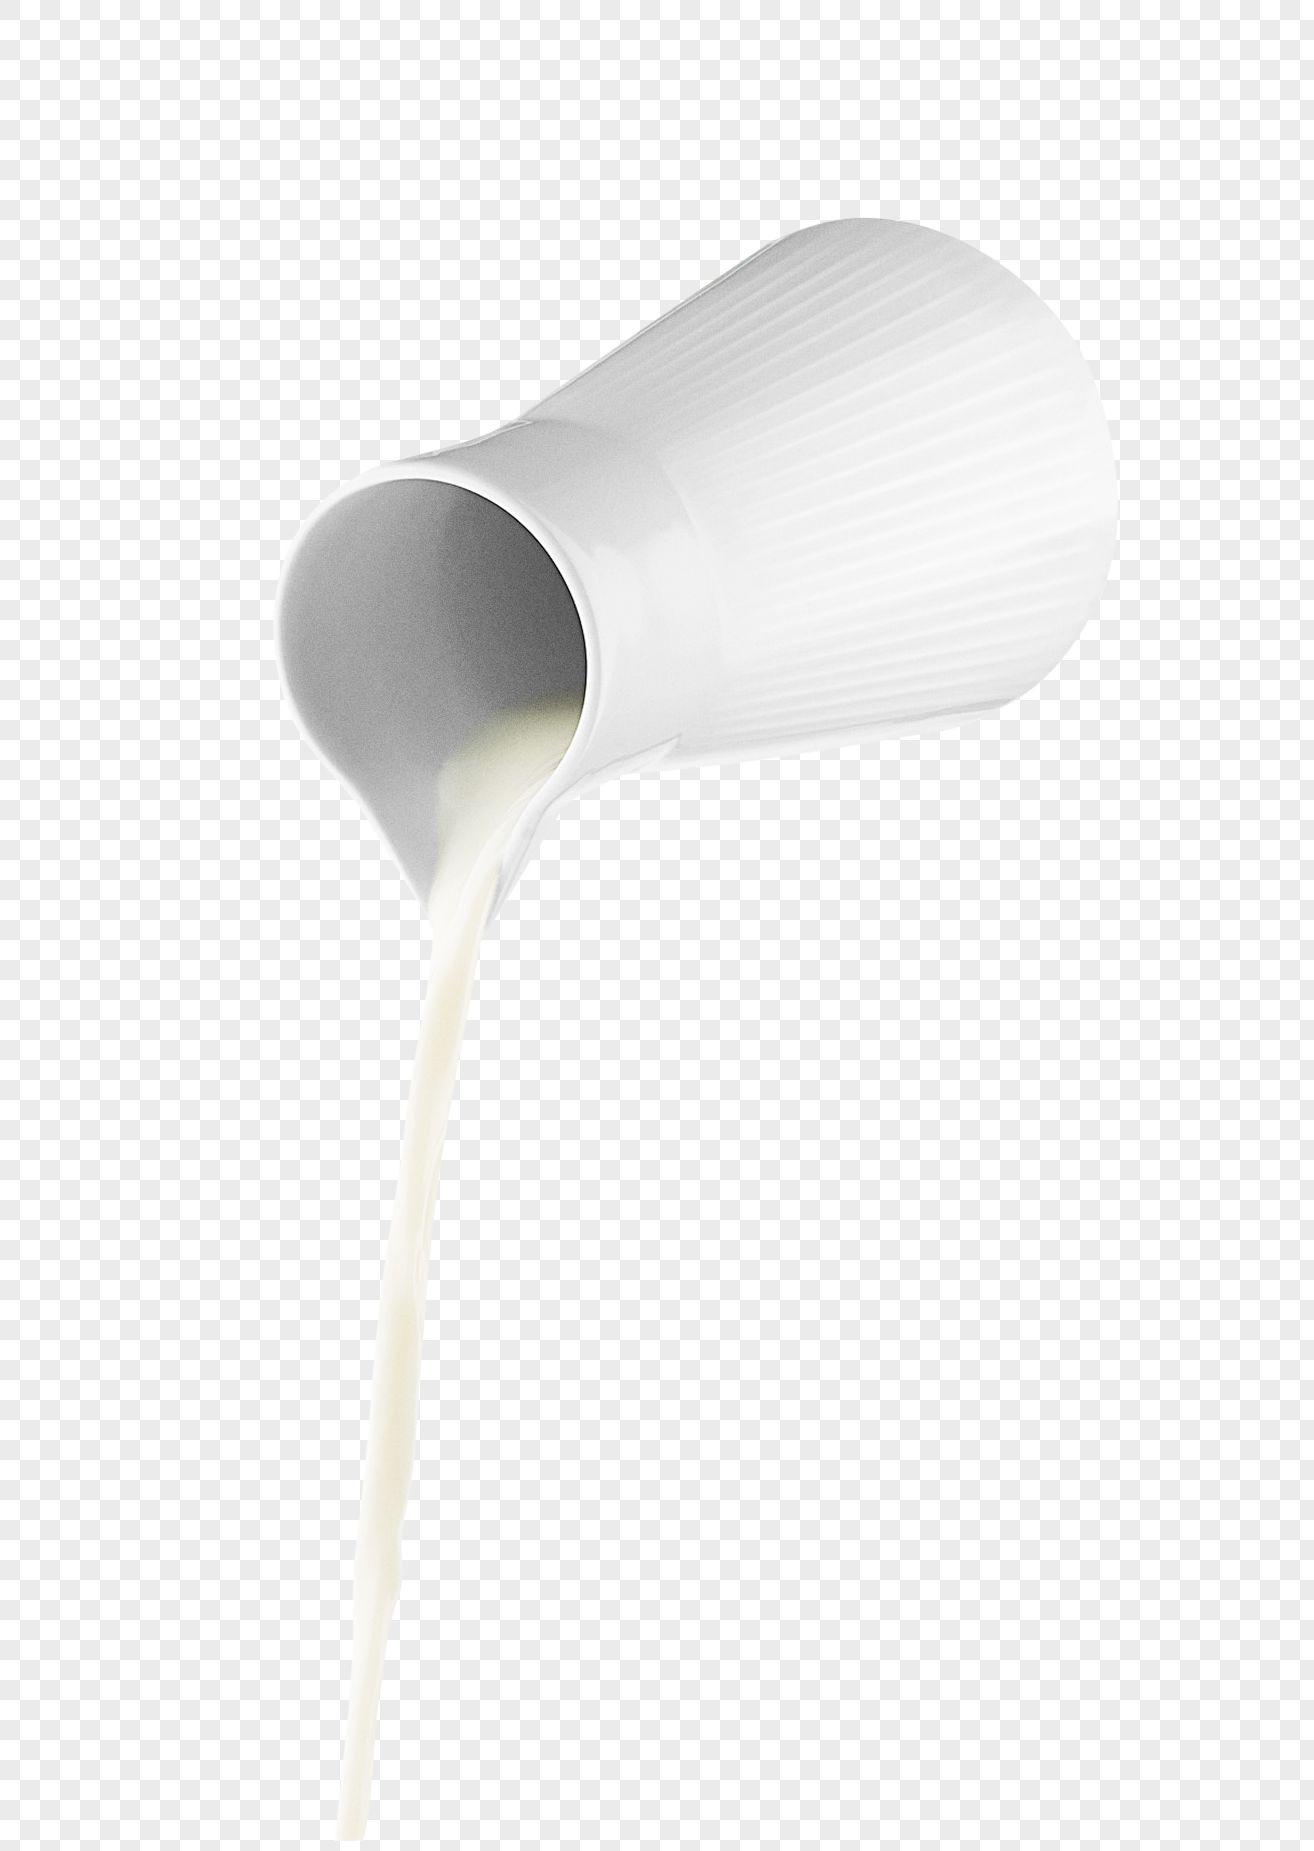 Milk Glass PNG Transparent Images Free Download, Vector Files